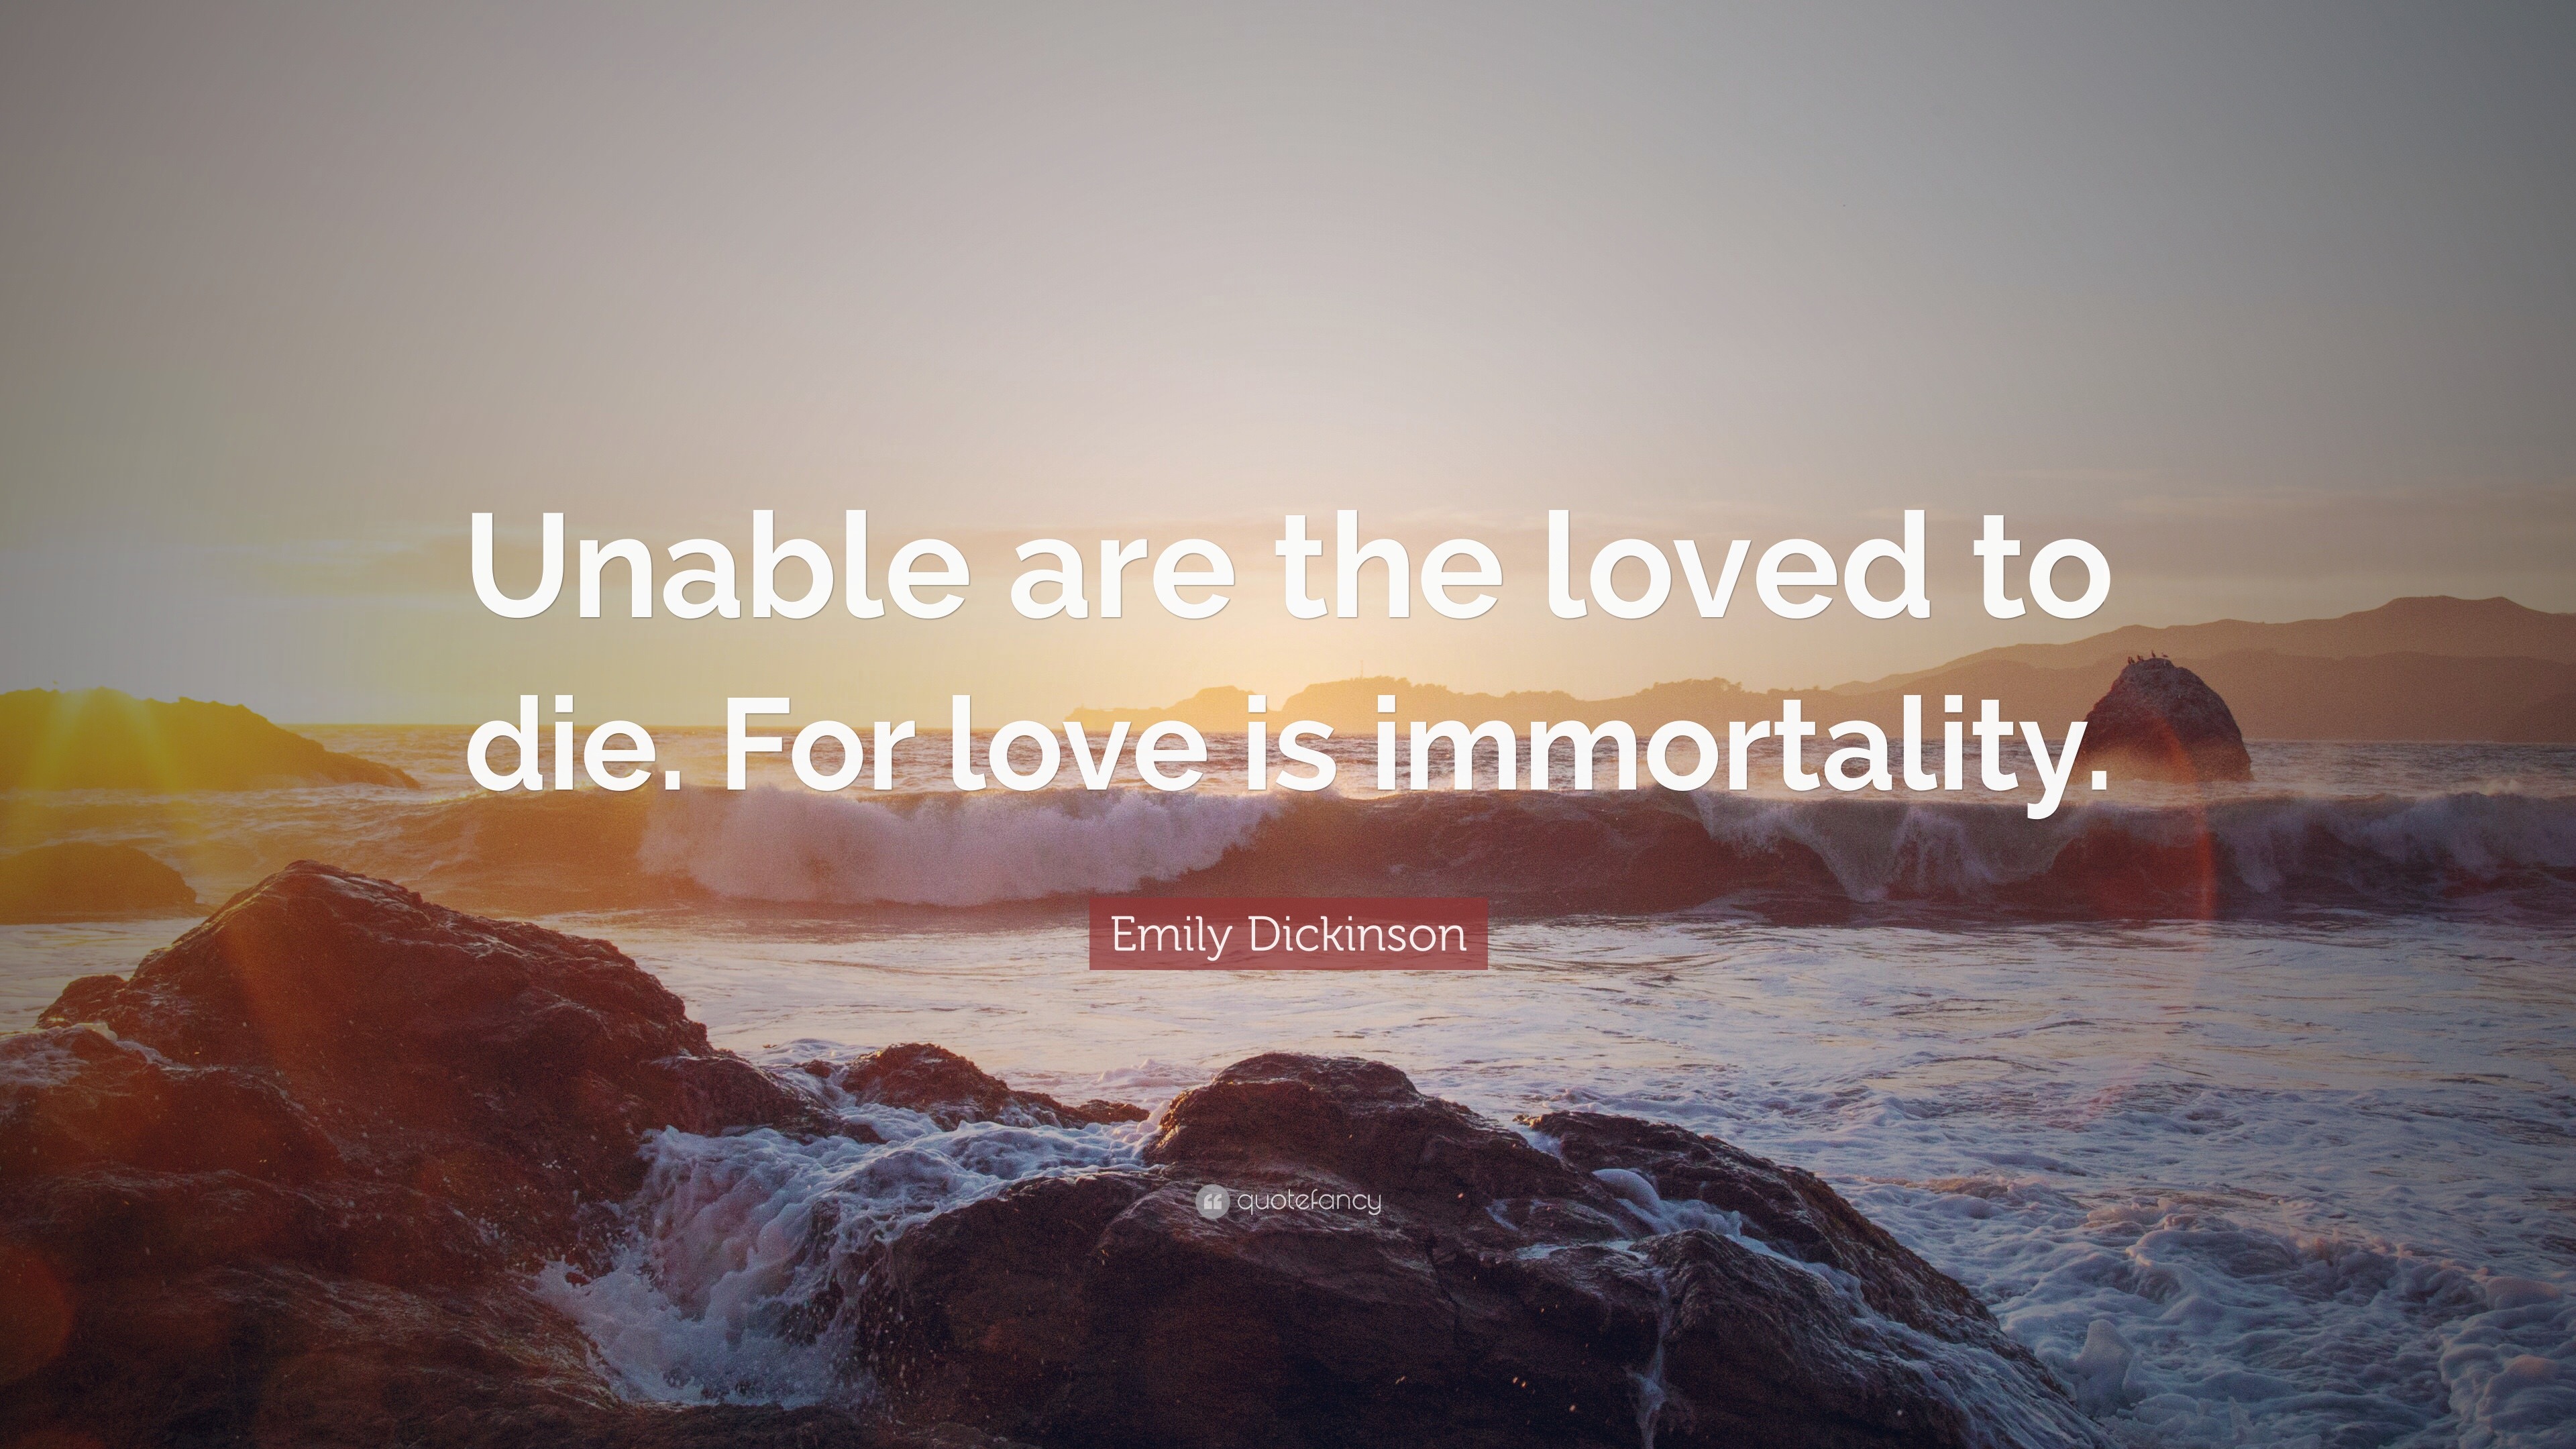 Emily Dickinson Quote: “Unable are the loved to die. For love is ...